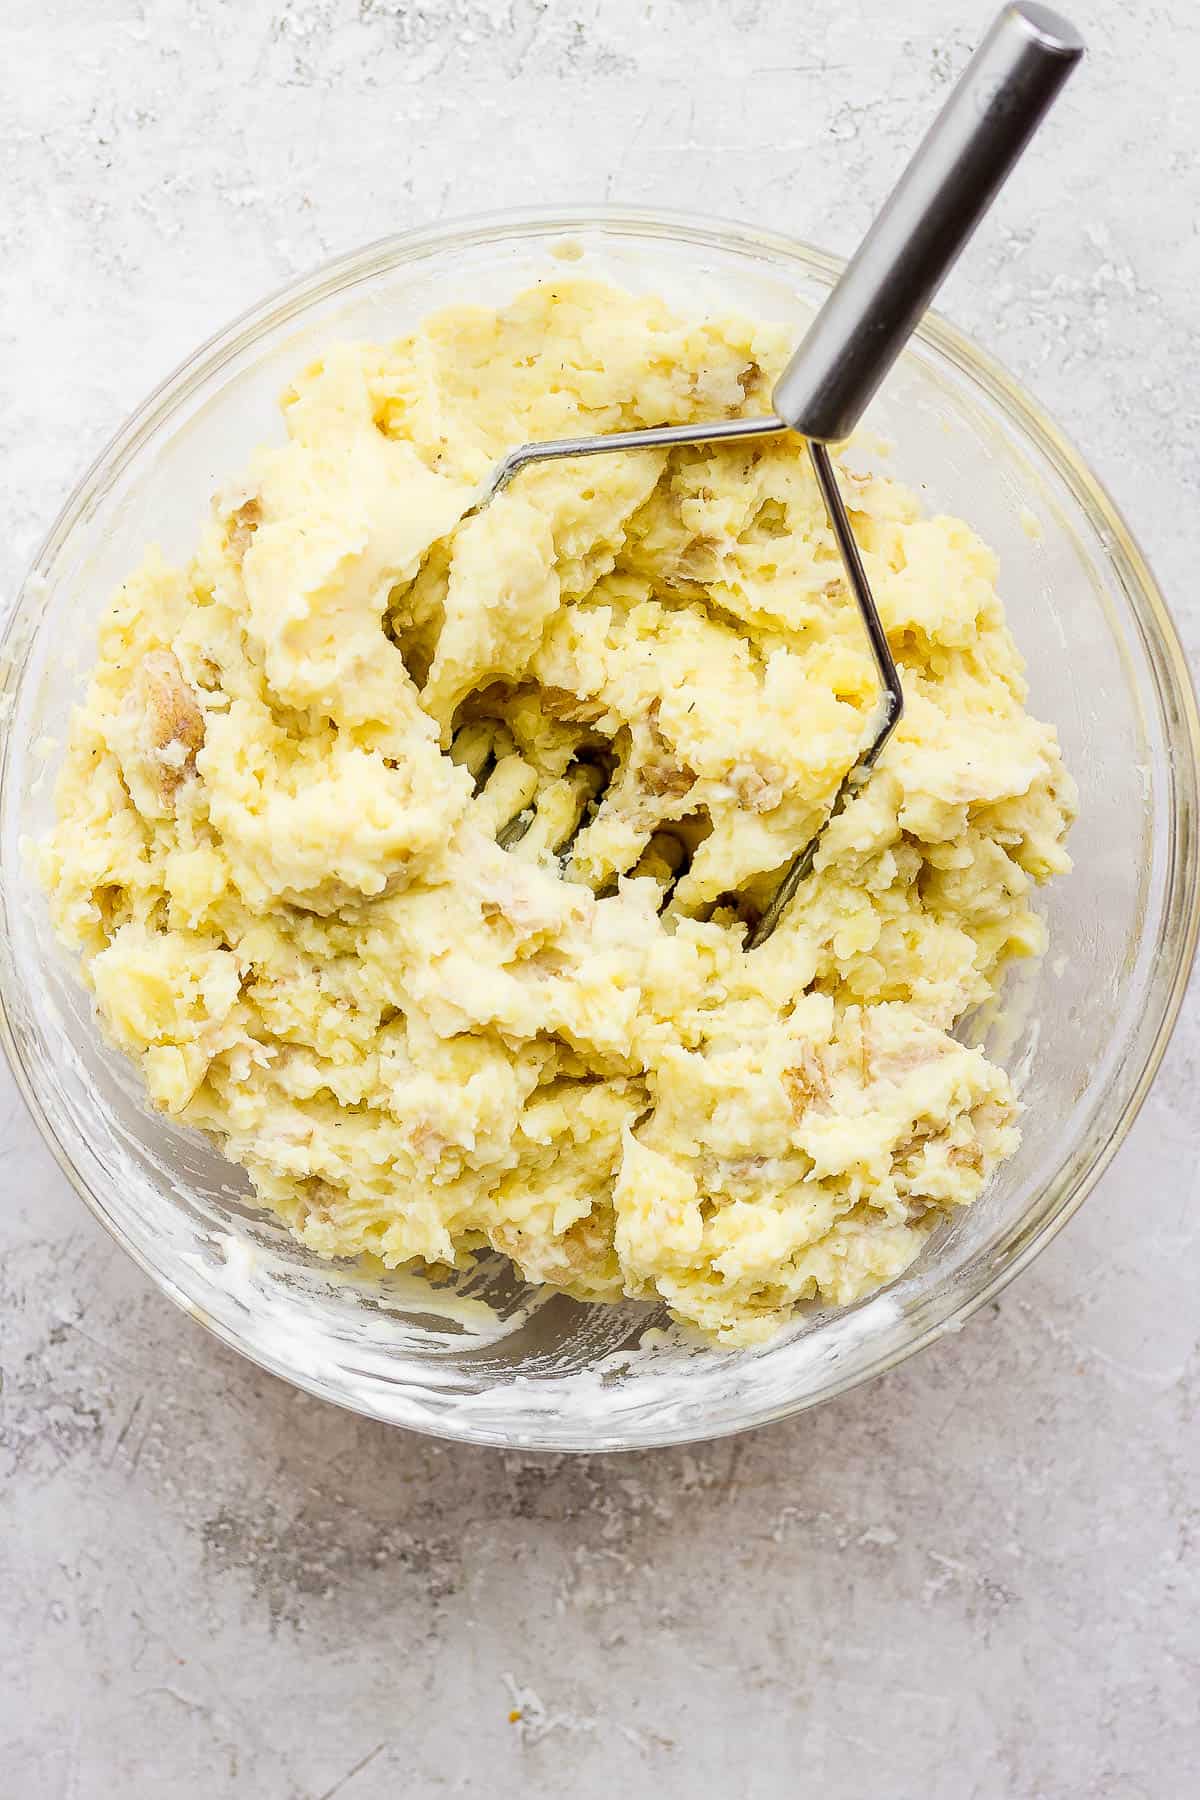 Mashed potatoes with all the other ingredients in a bowl.